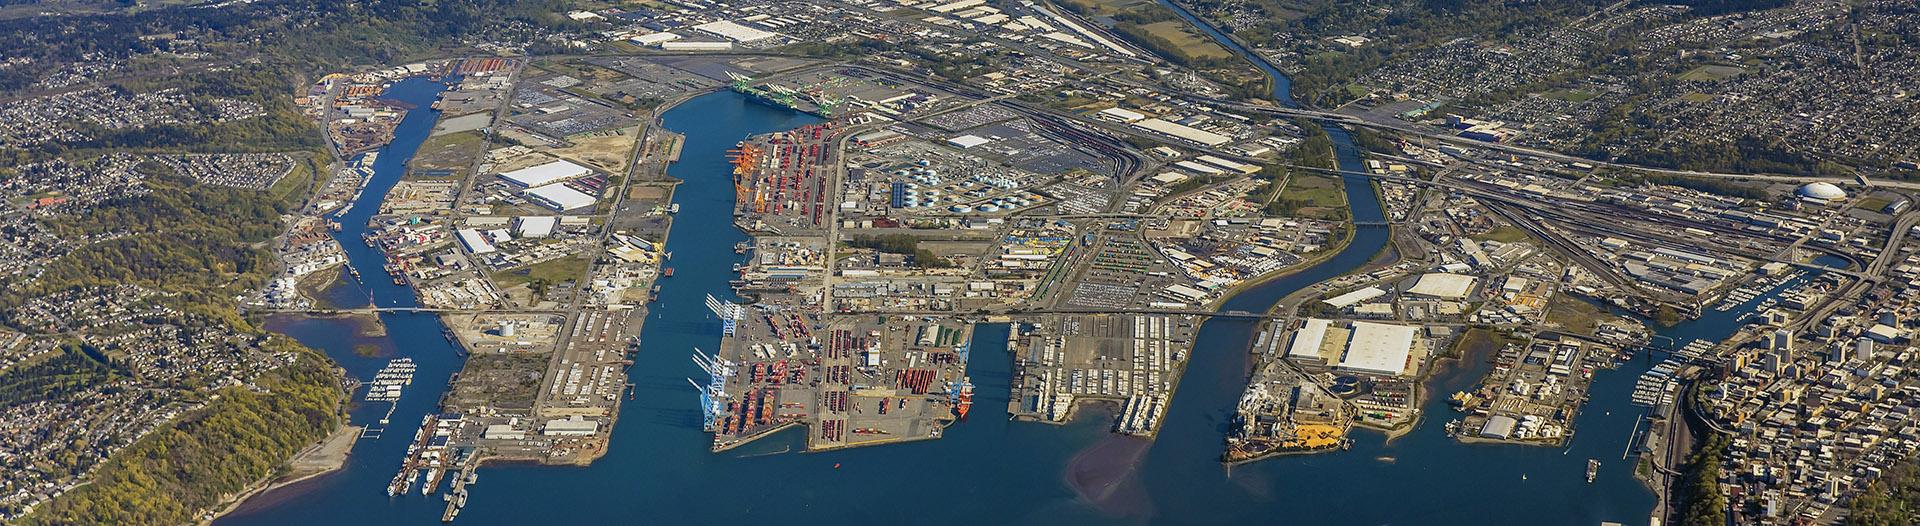 Aerial view of the Port of Tacoma